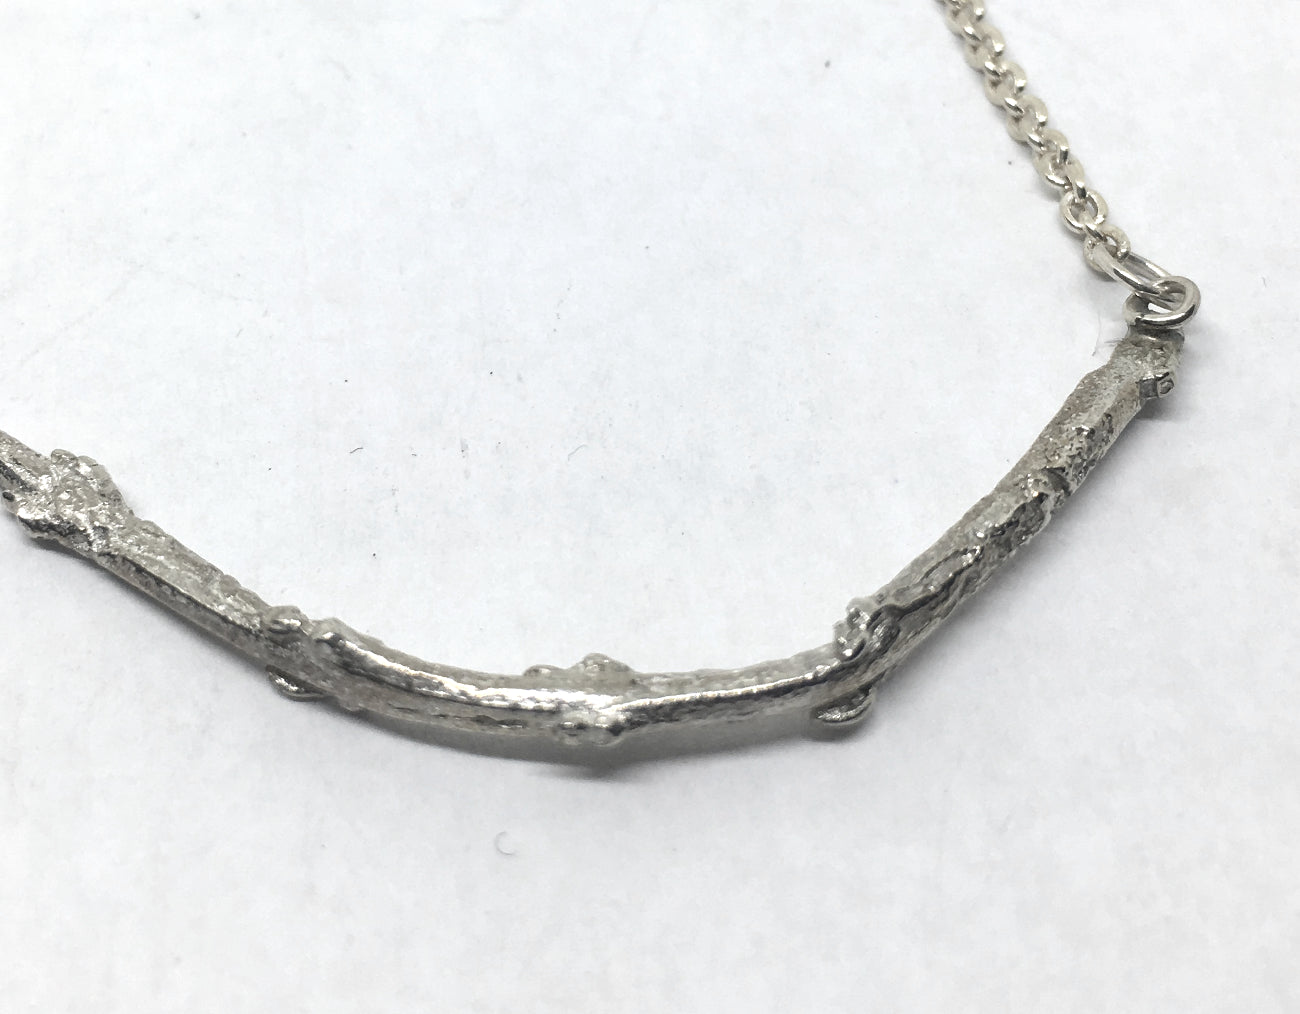 Olive Twig Necklace in Sterling Silver